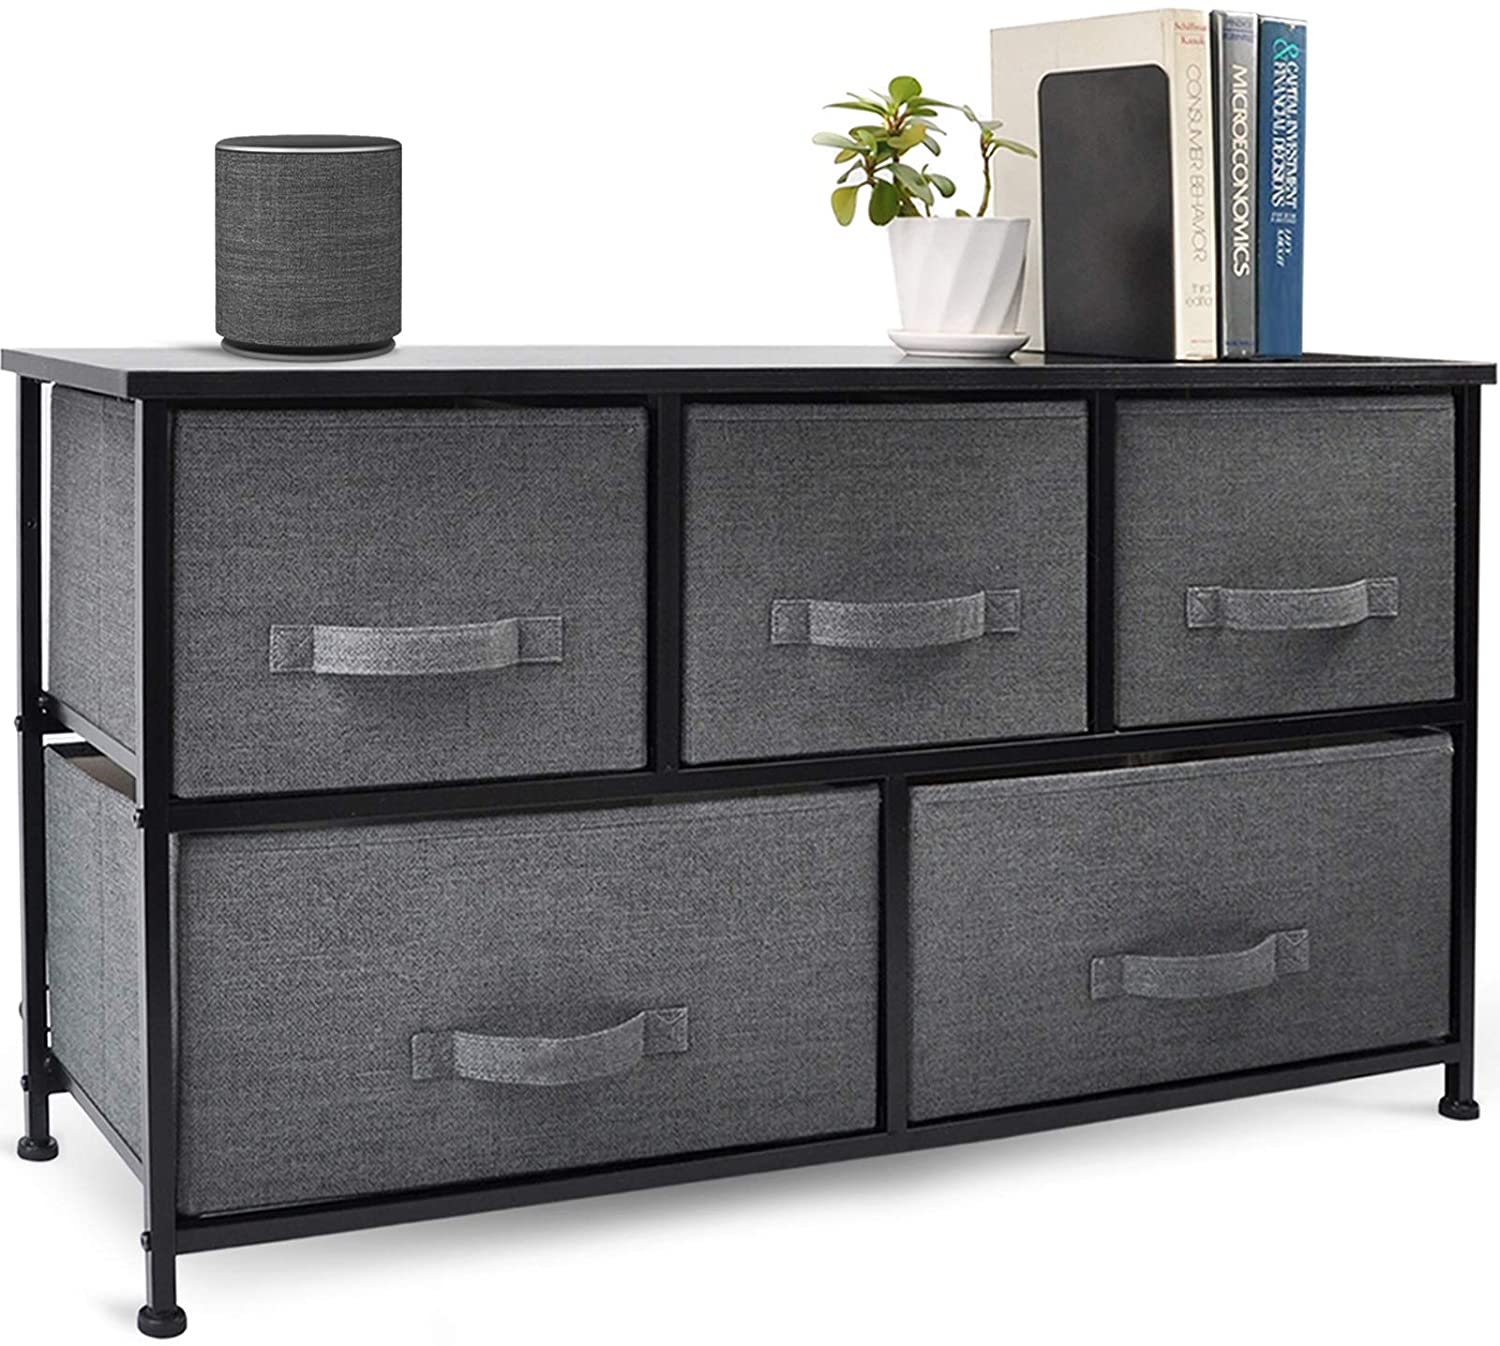 CERBIOR Wide Drawer Dresser Storage Organizer 5-Drawer Closet Shelves, Sturdy Steel Frame Wood Top with Easy Pull Fabric Bins for Clothing, Blankets - Charcoal